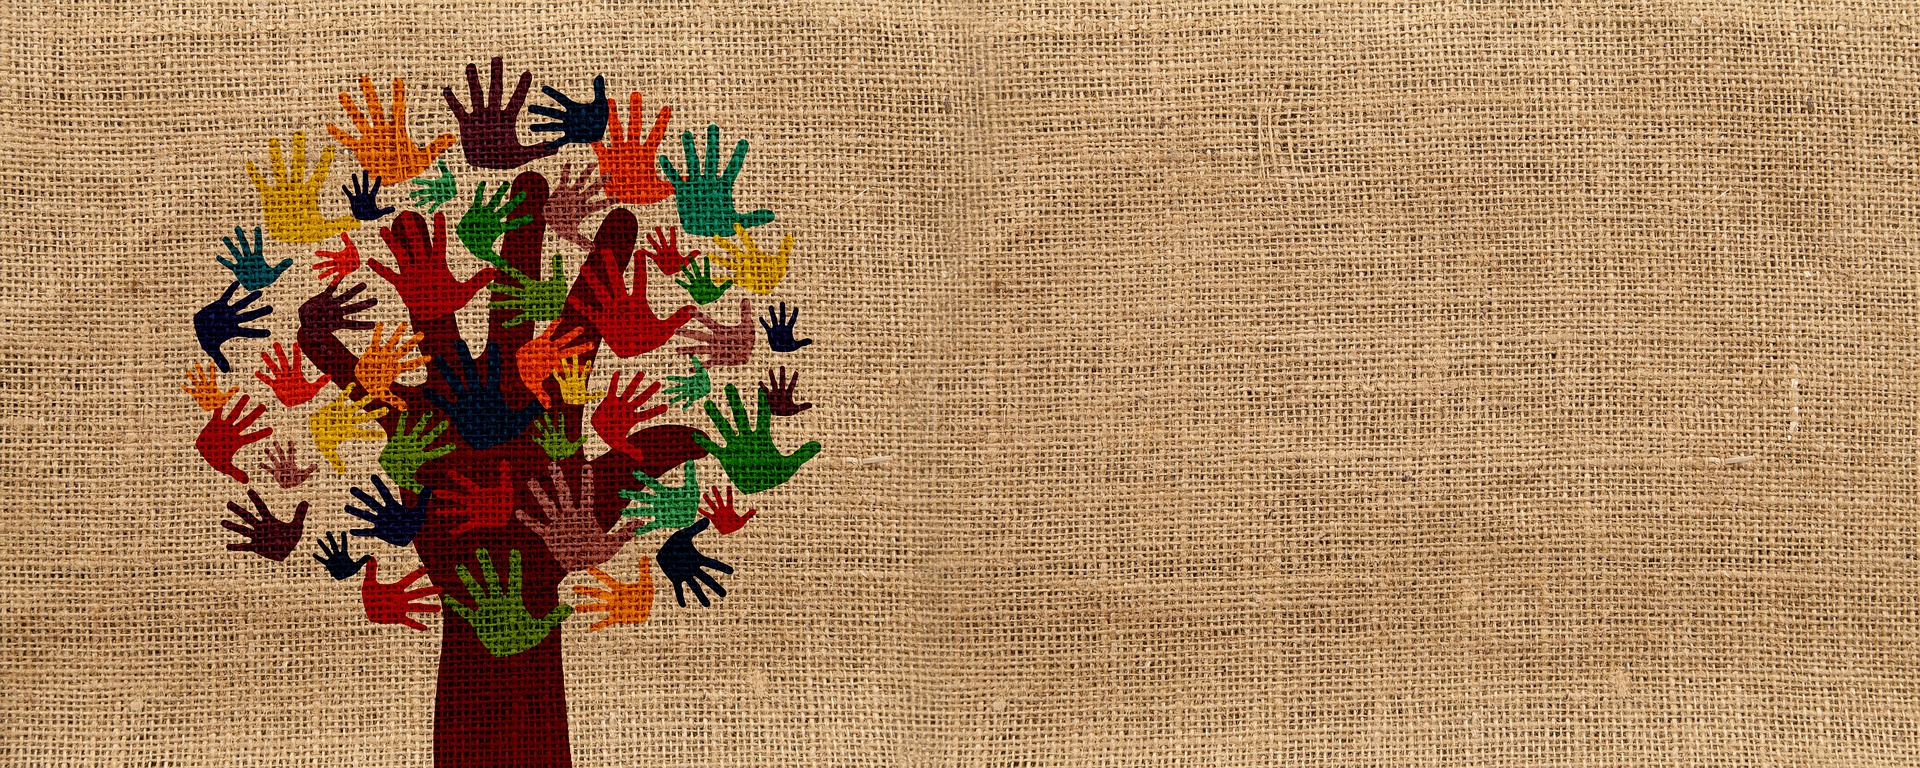 Tree graphic with leaves that look like hands, painted on burlap